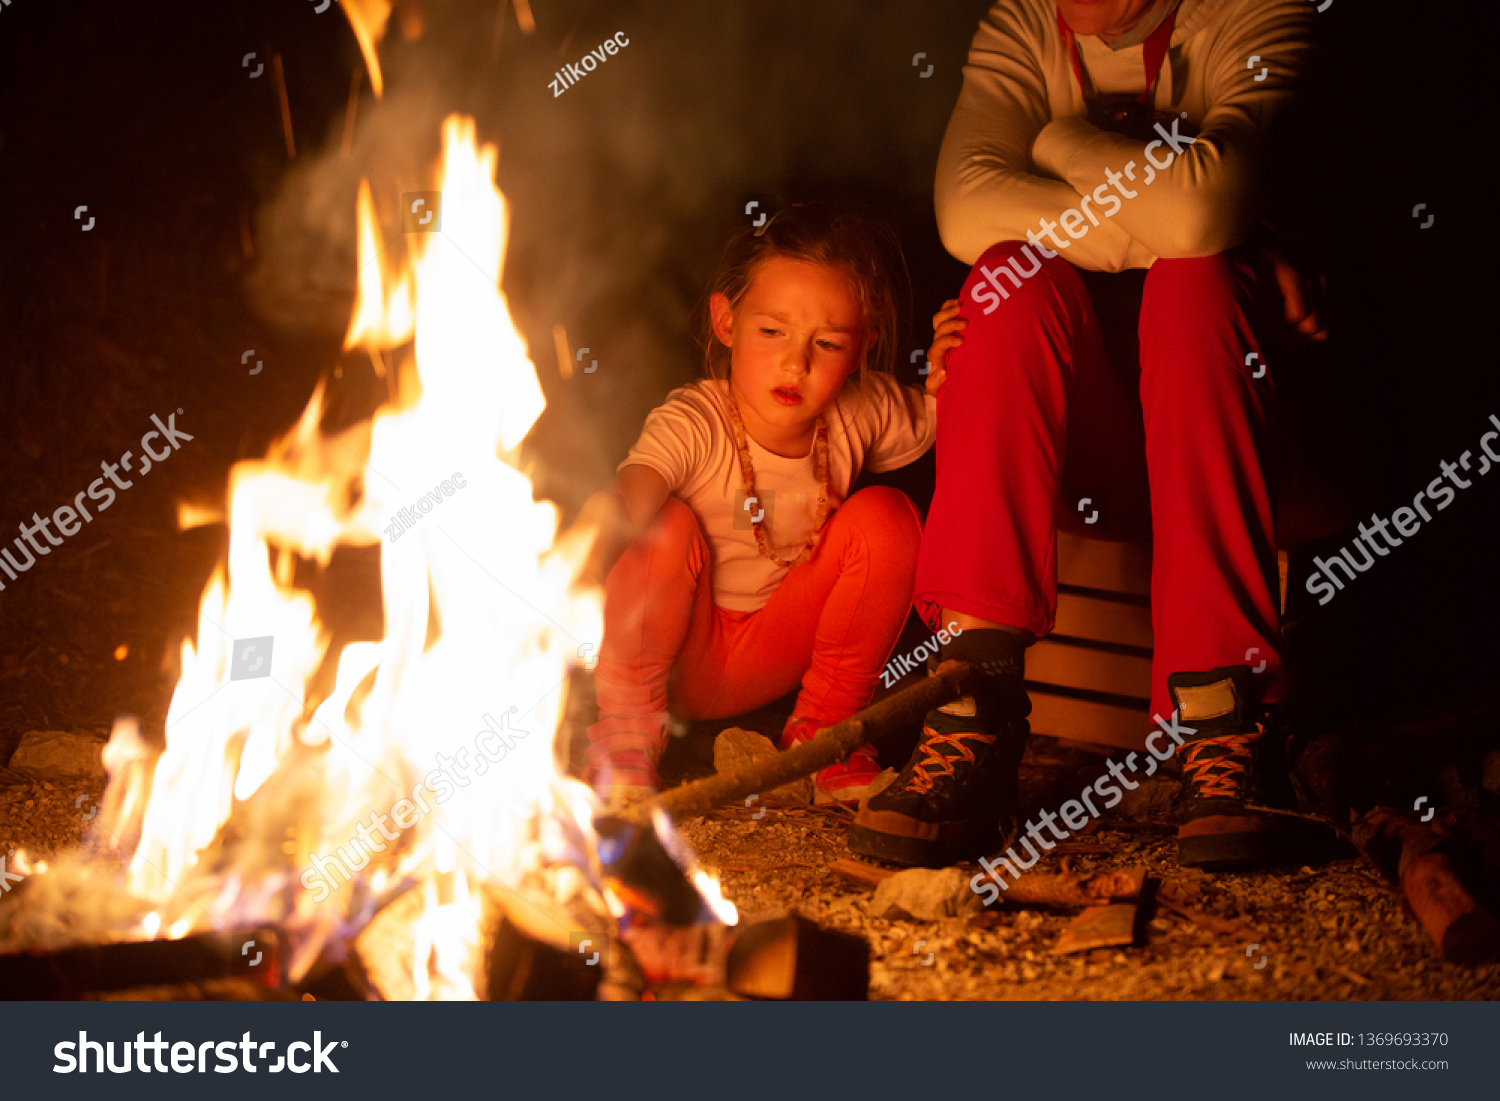 Mother and daughter spending quality time by a self-made campfire during adventurous camping trip, playing with fire. Active natural lifestyle, family time and love concept.  #1369693370